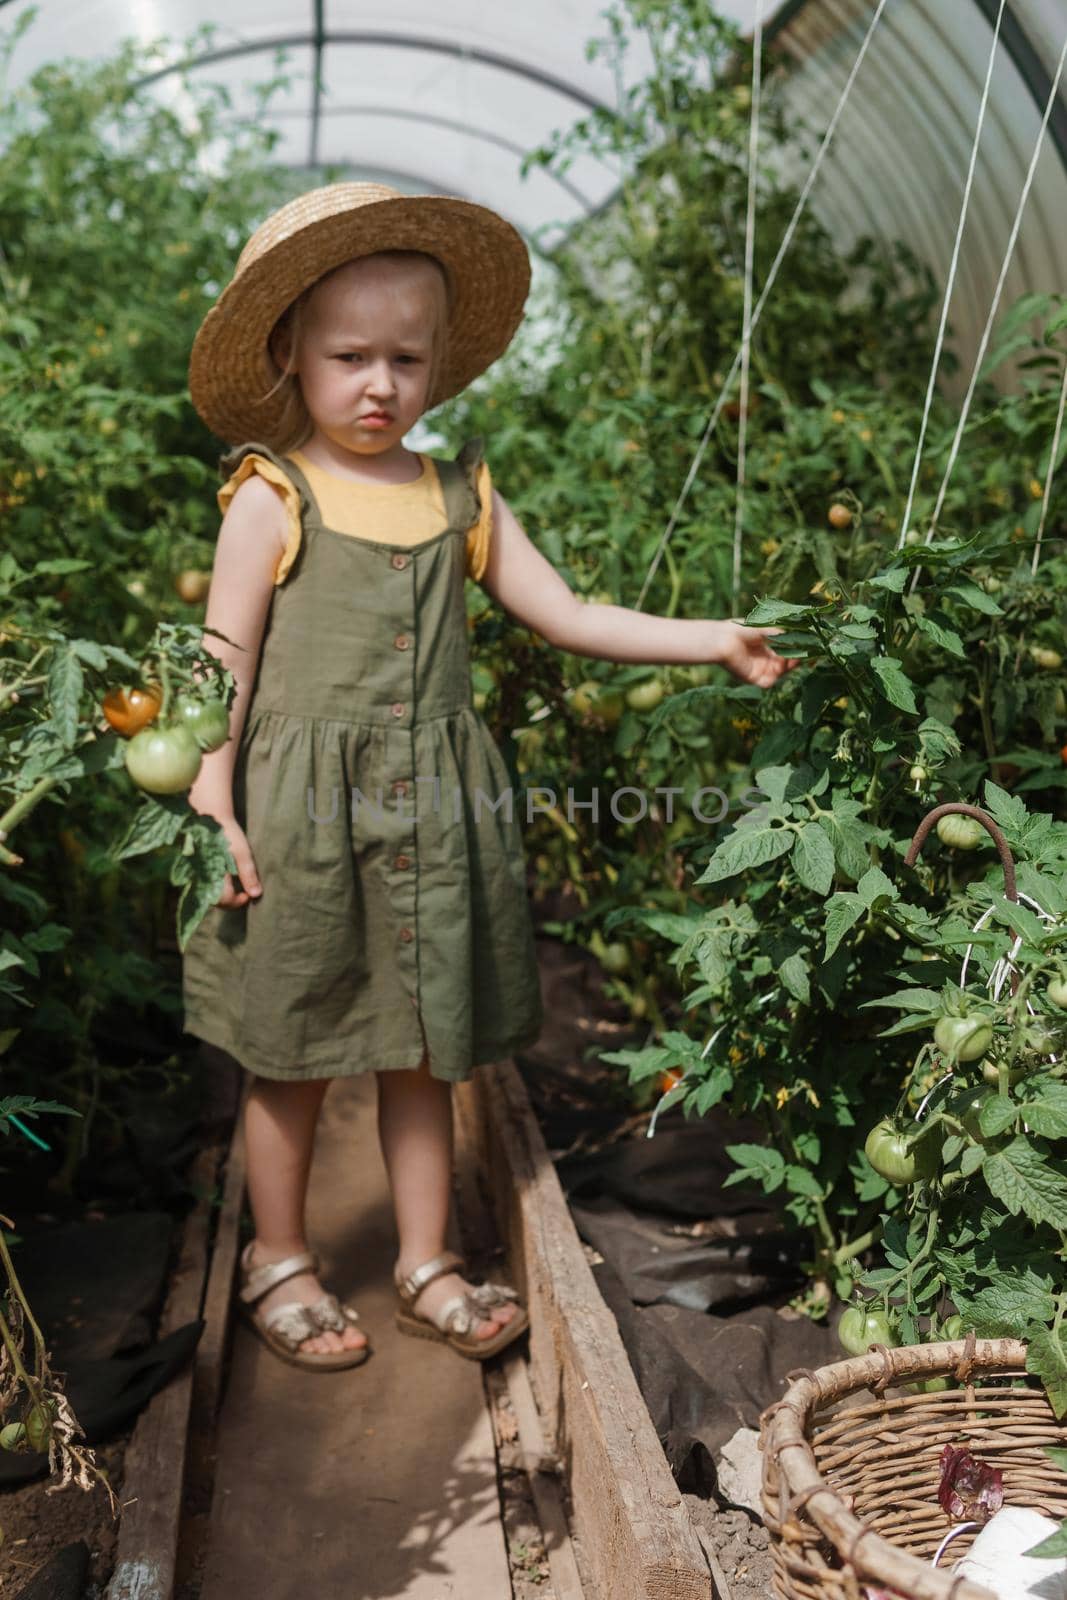 A little girl in a straw hat is picking tomatoes in a greenhouse. Harvest concept. Watering plants with water, caring for tomatoes.